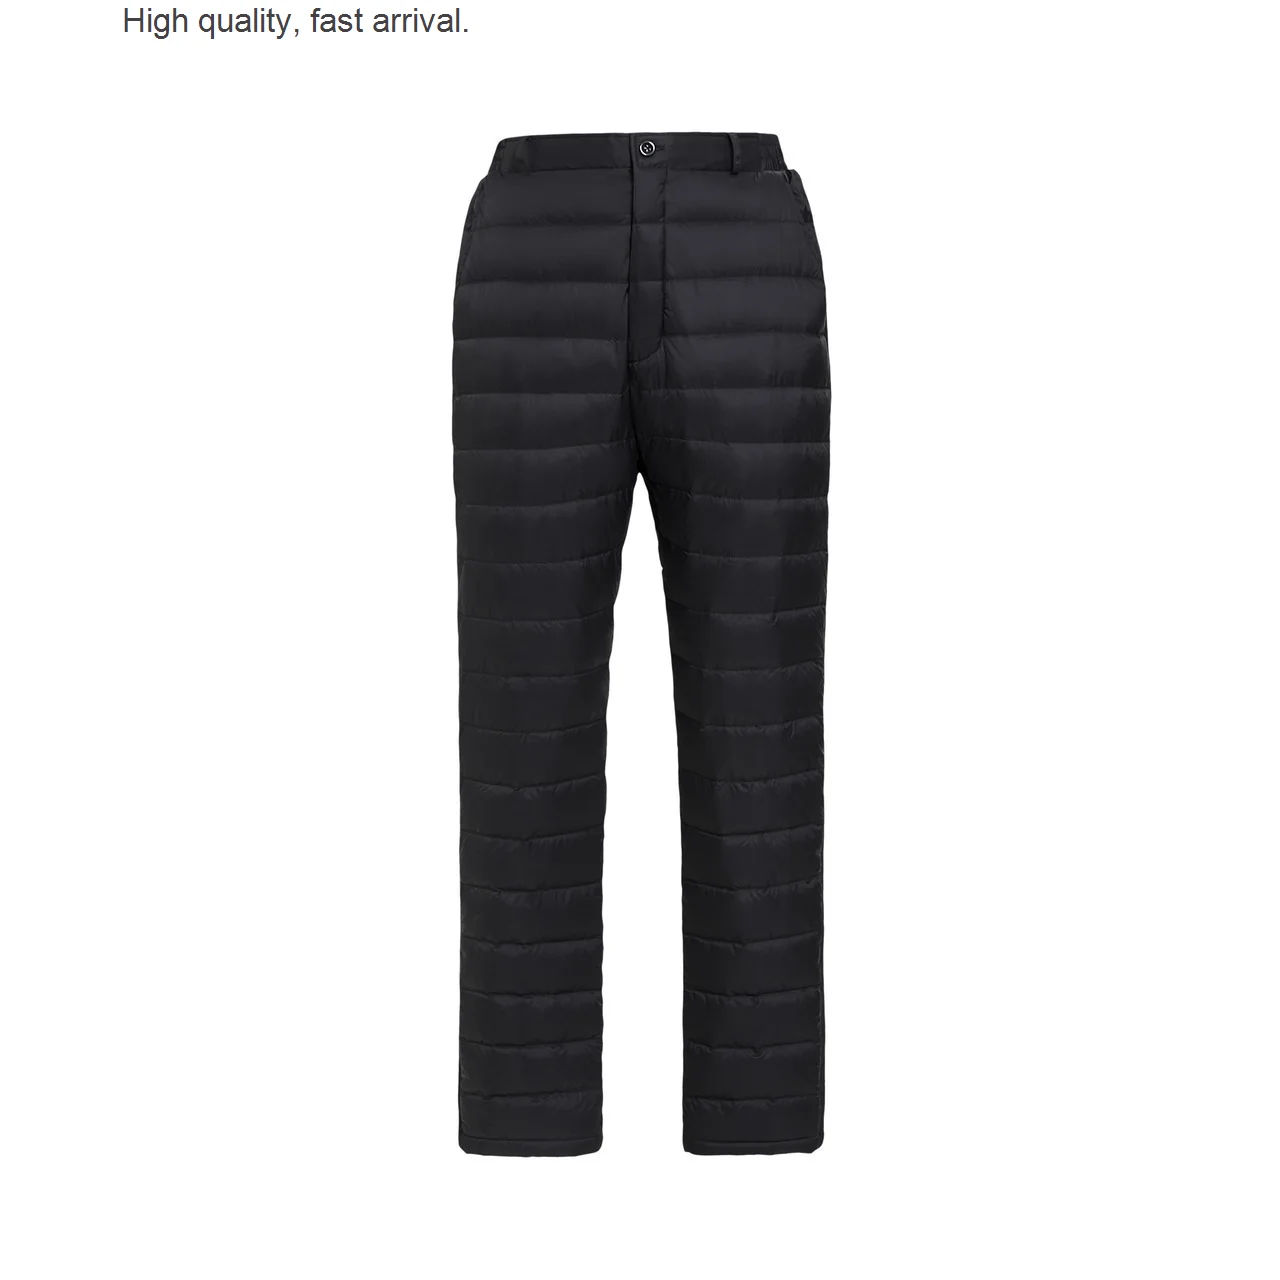 Wadded Trousers down Men's Outer Wear Middle-Aged and Elderly Large Size High Waist Warm Thickened Inner Wear off-Season